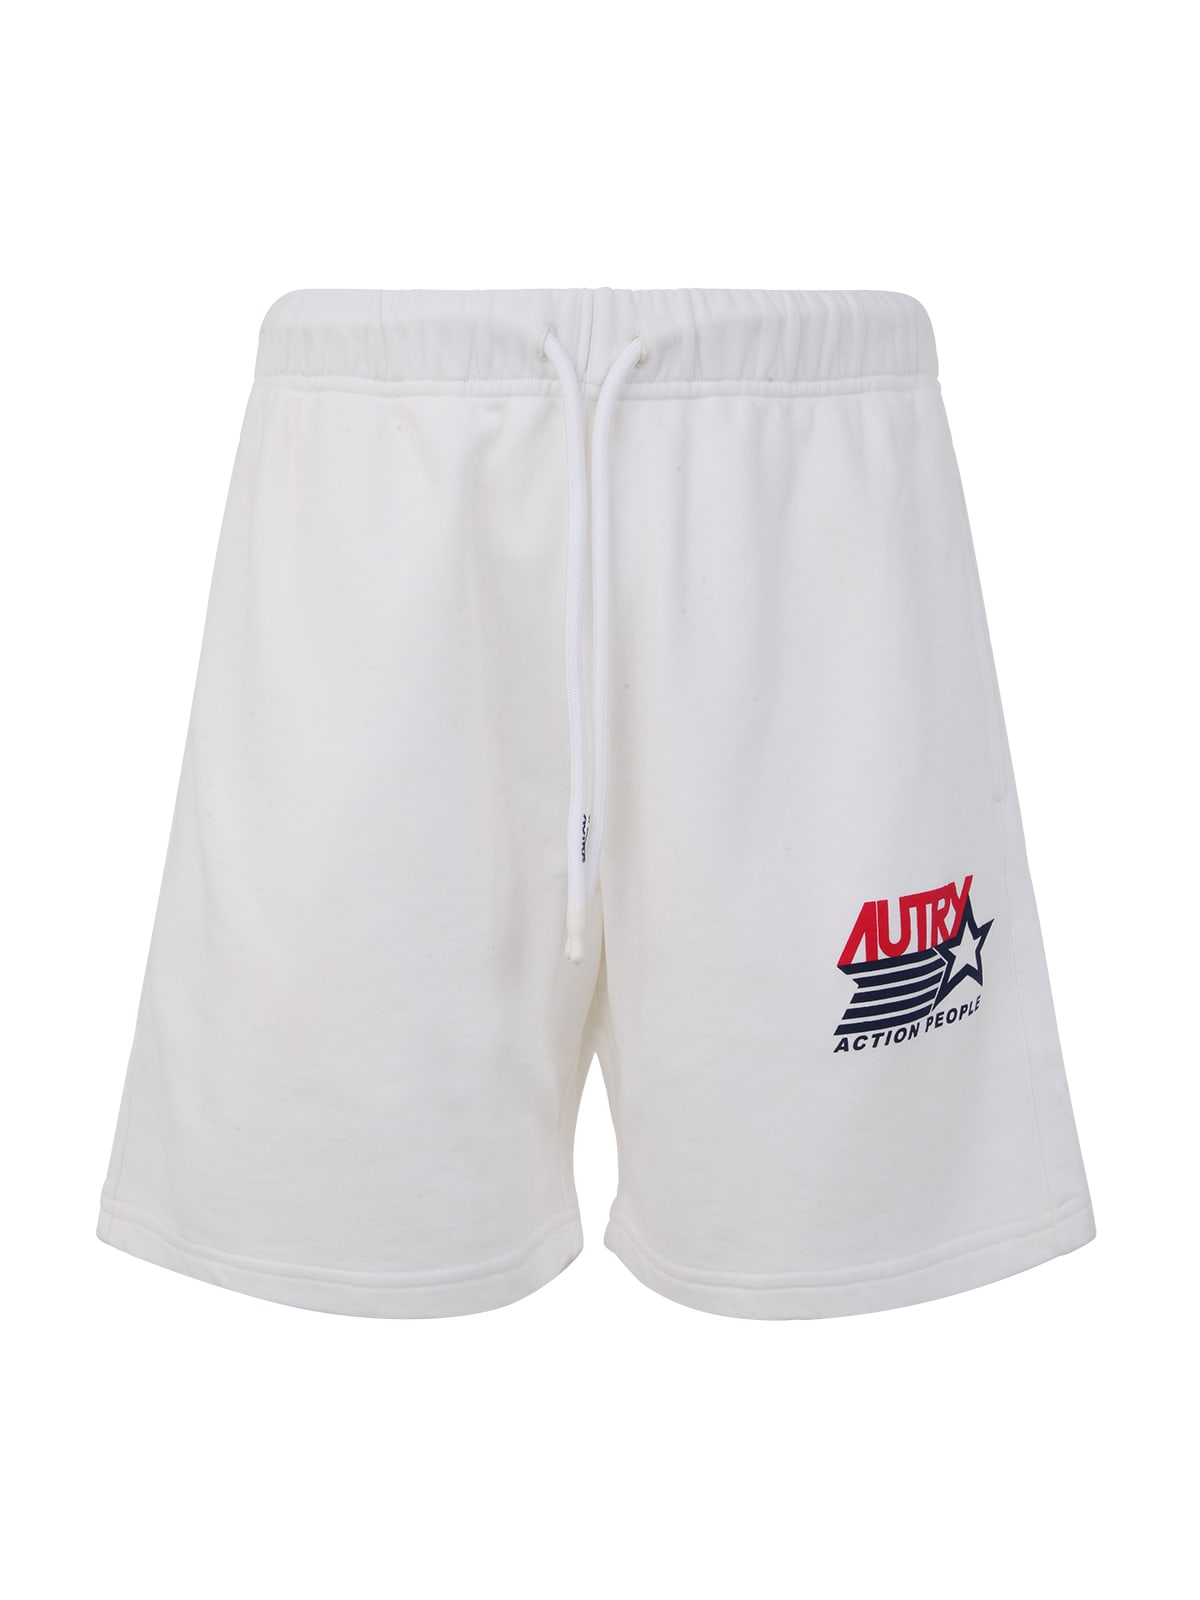 AUTRY SHORTS ICONIC MAN ACTION WHITE